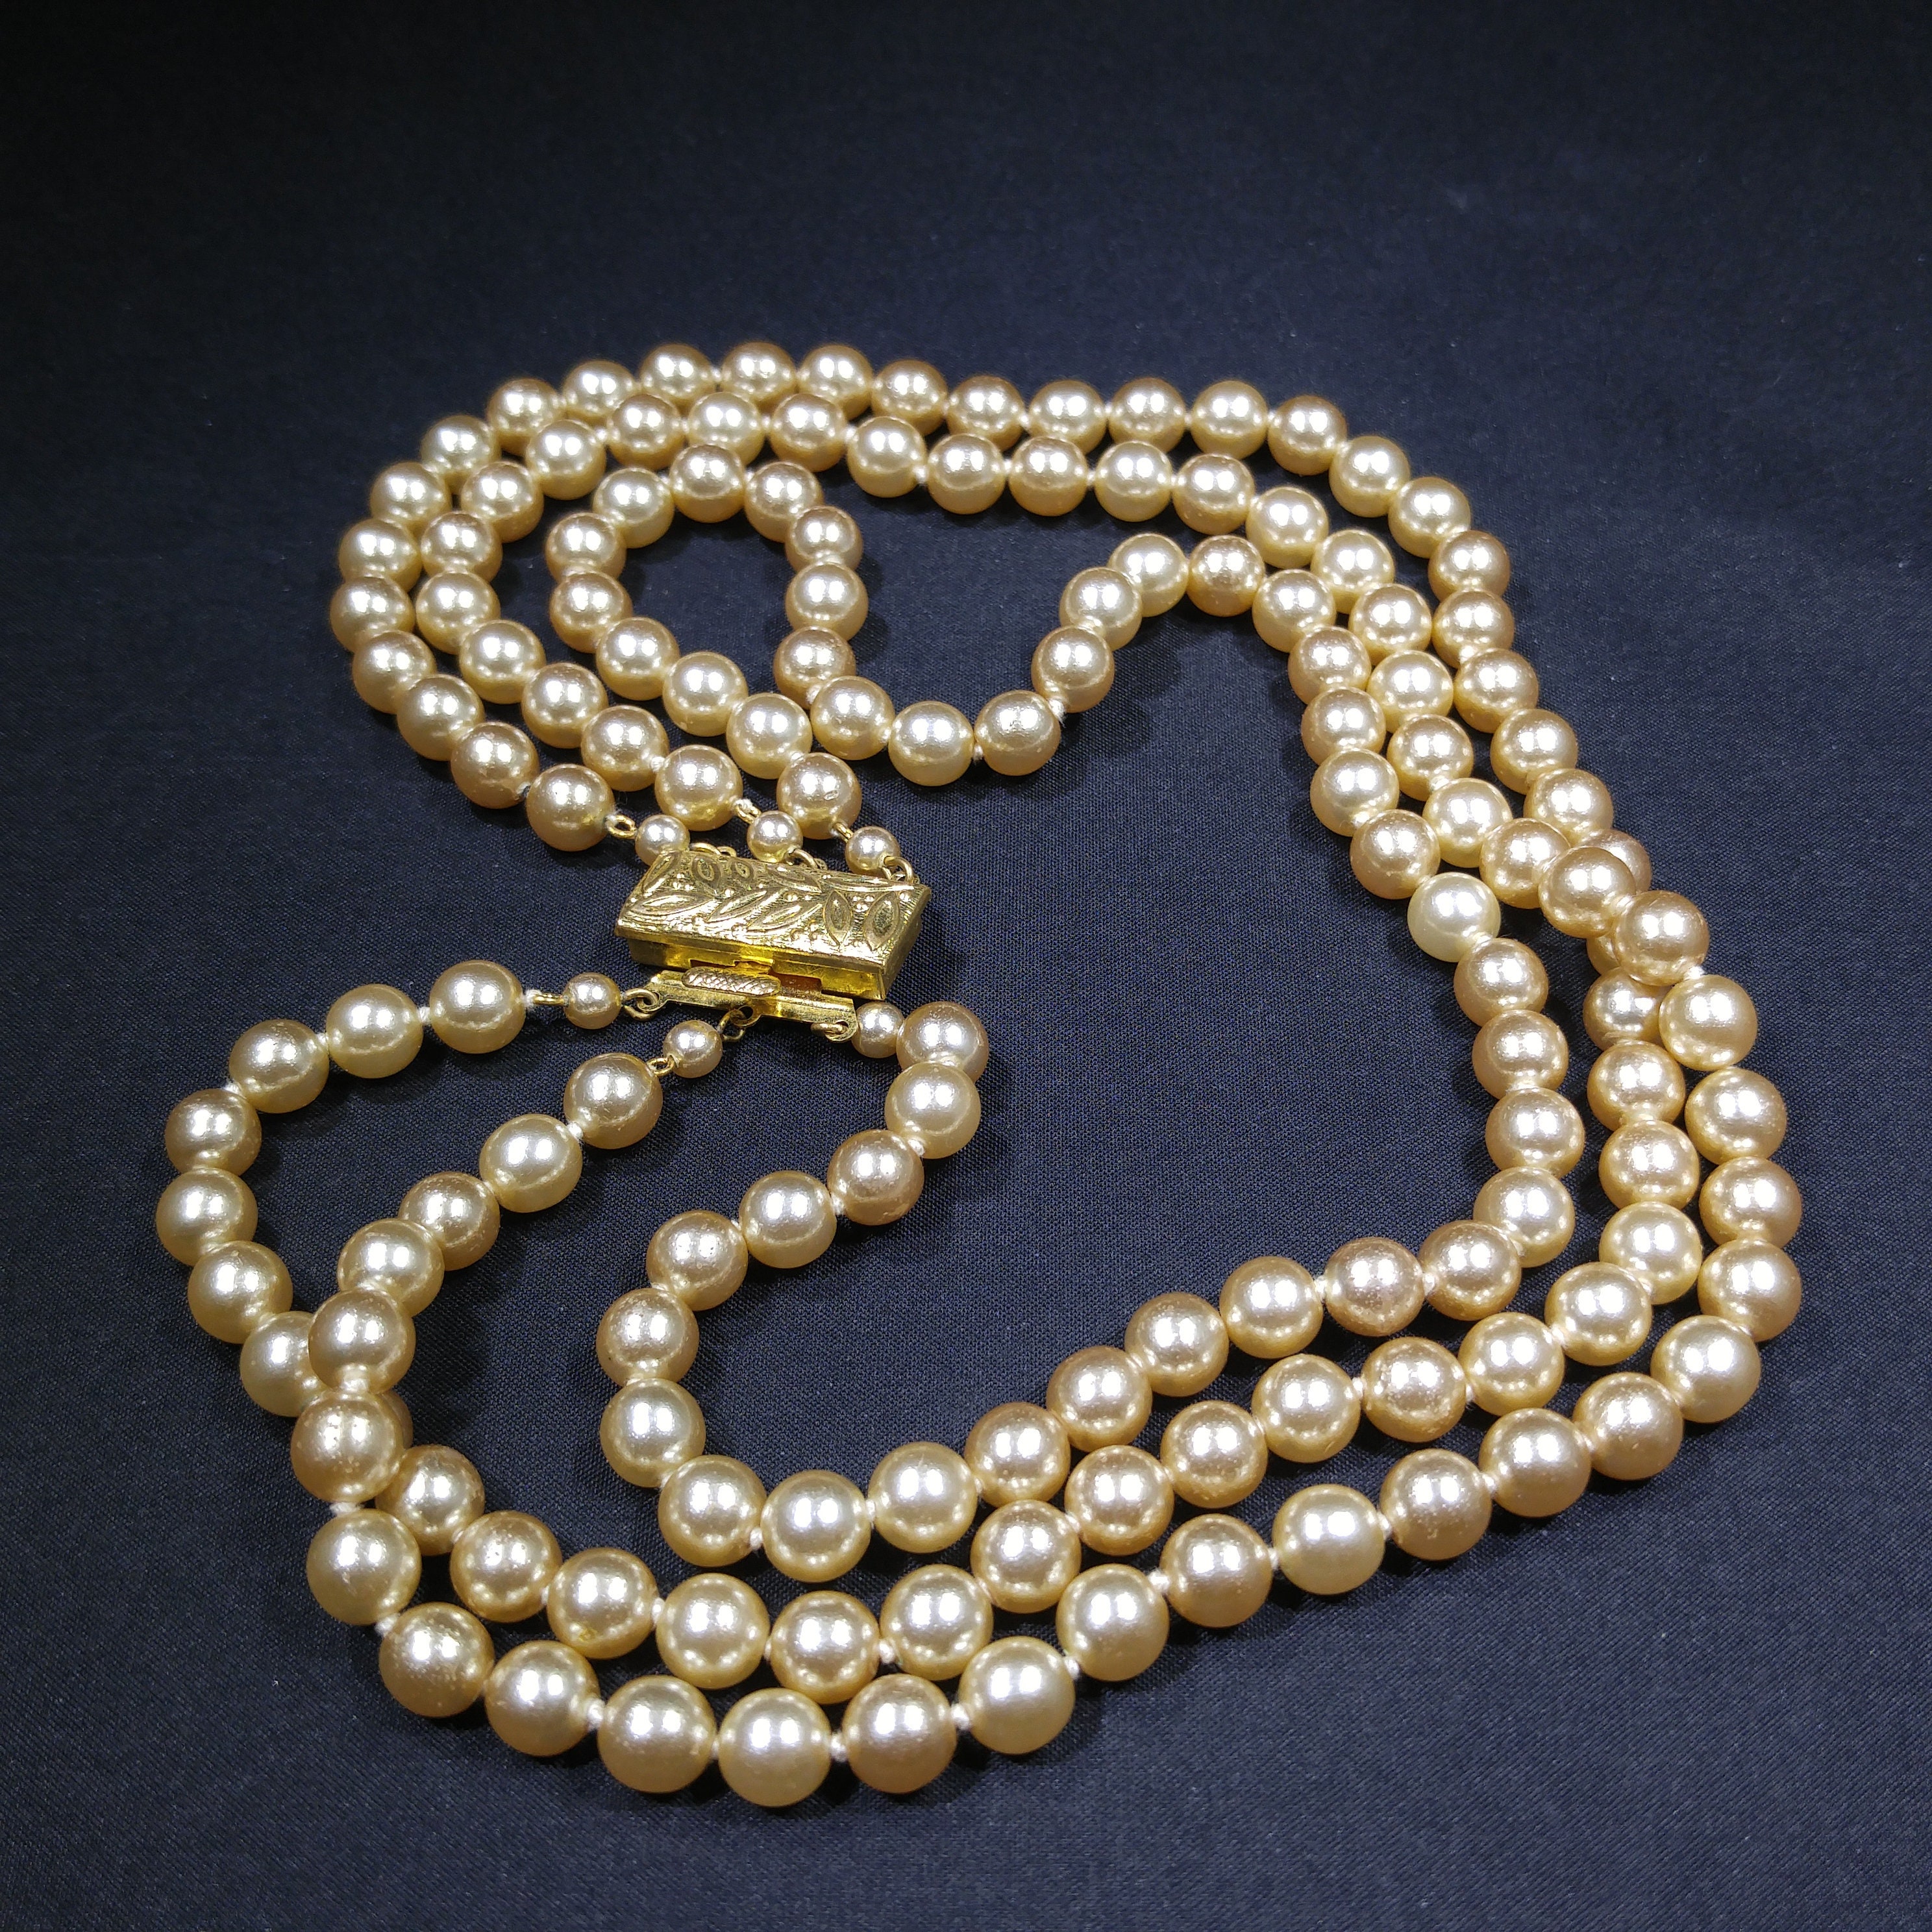 1928 Jewelry Classic 3 Strand Faux Pearl Necklace 16 + 3 Extender